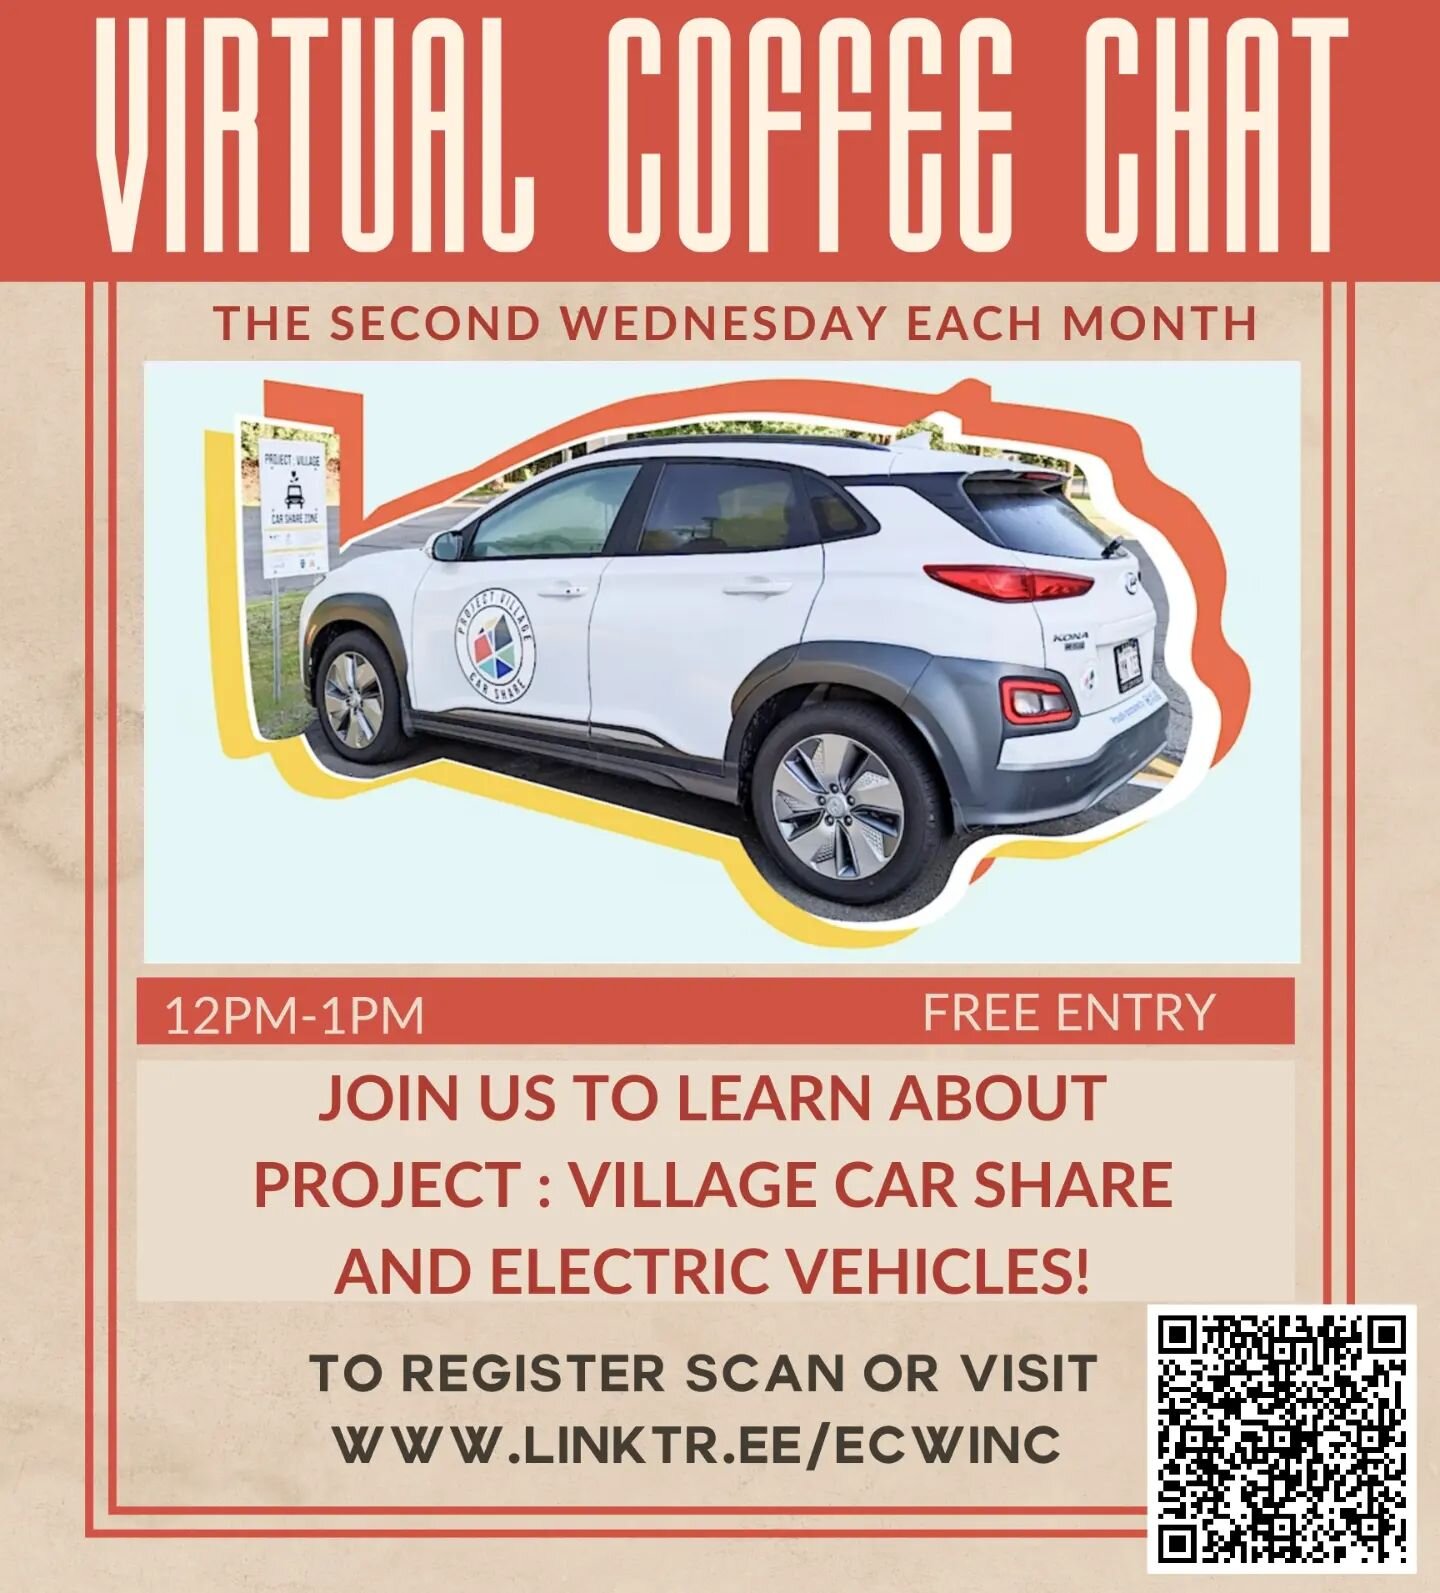 On the second Wednesday of each month Zaria is online to answer any questions you have about our car share. Registration is completely free! The link to register is in our bio.